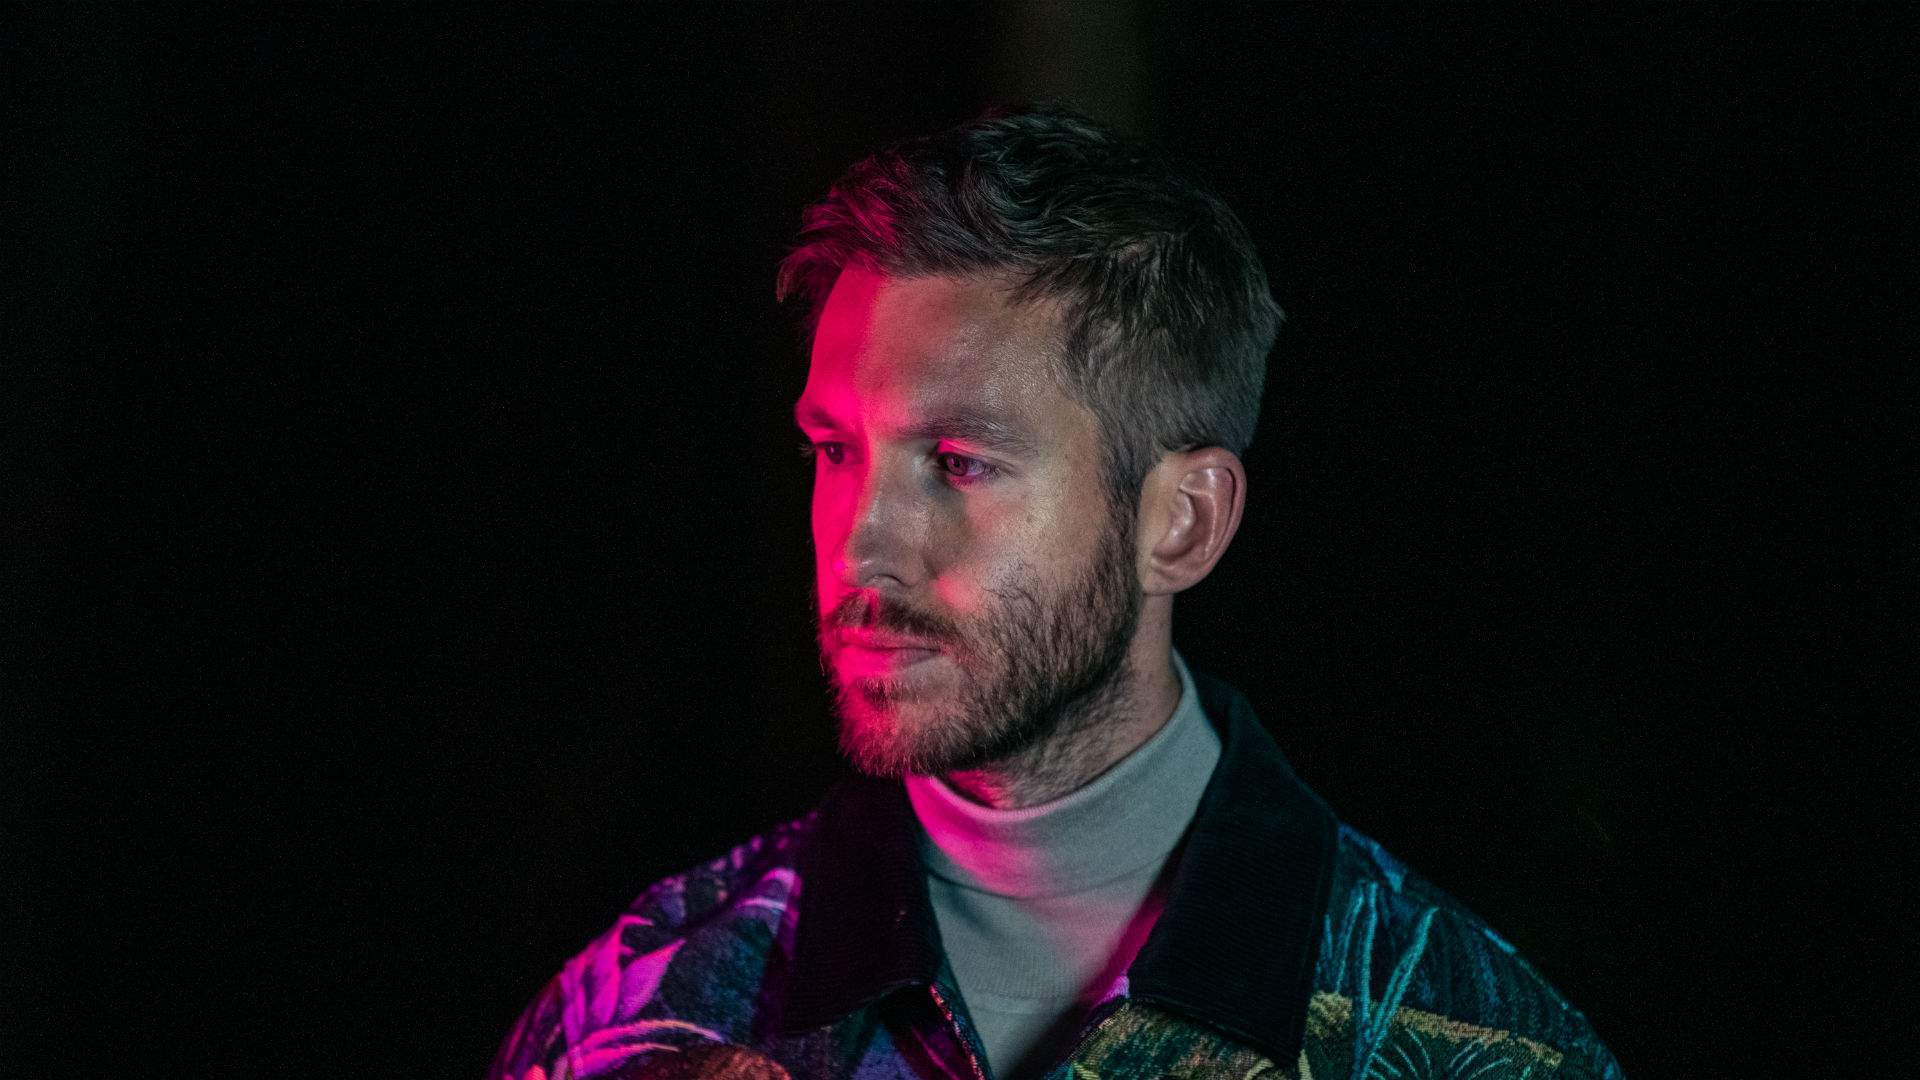 New Zealand's Next Big Music Festival Will Arrive This Summer with Calvin Harris and Juice WRLD